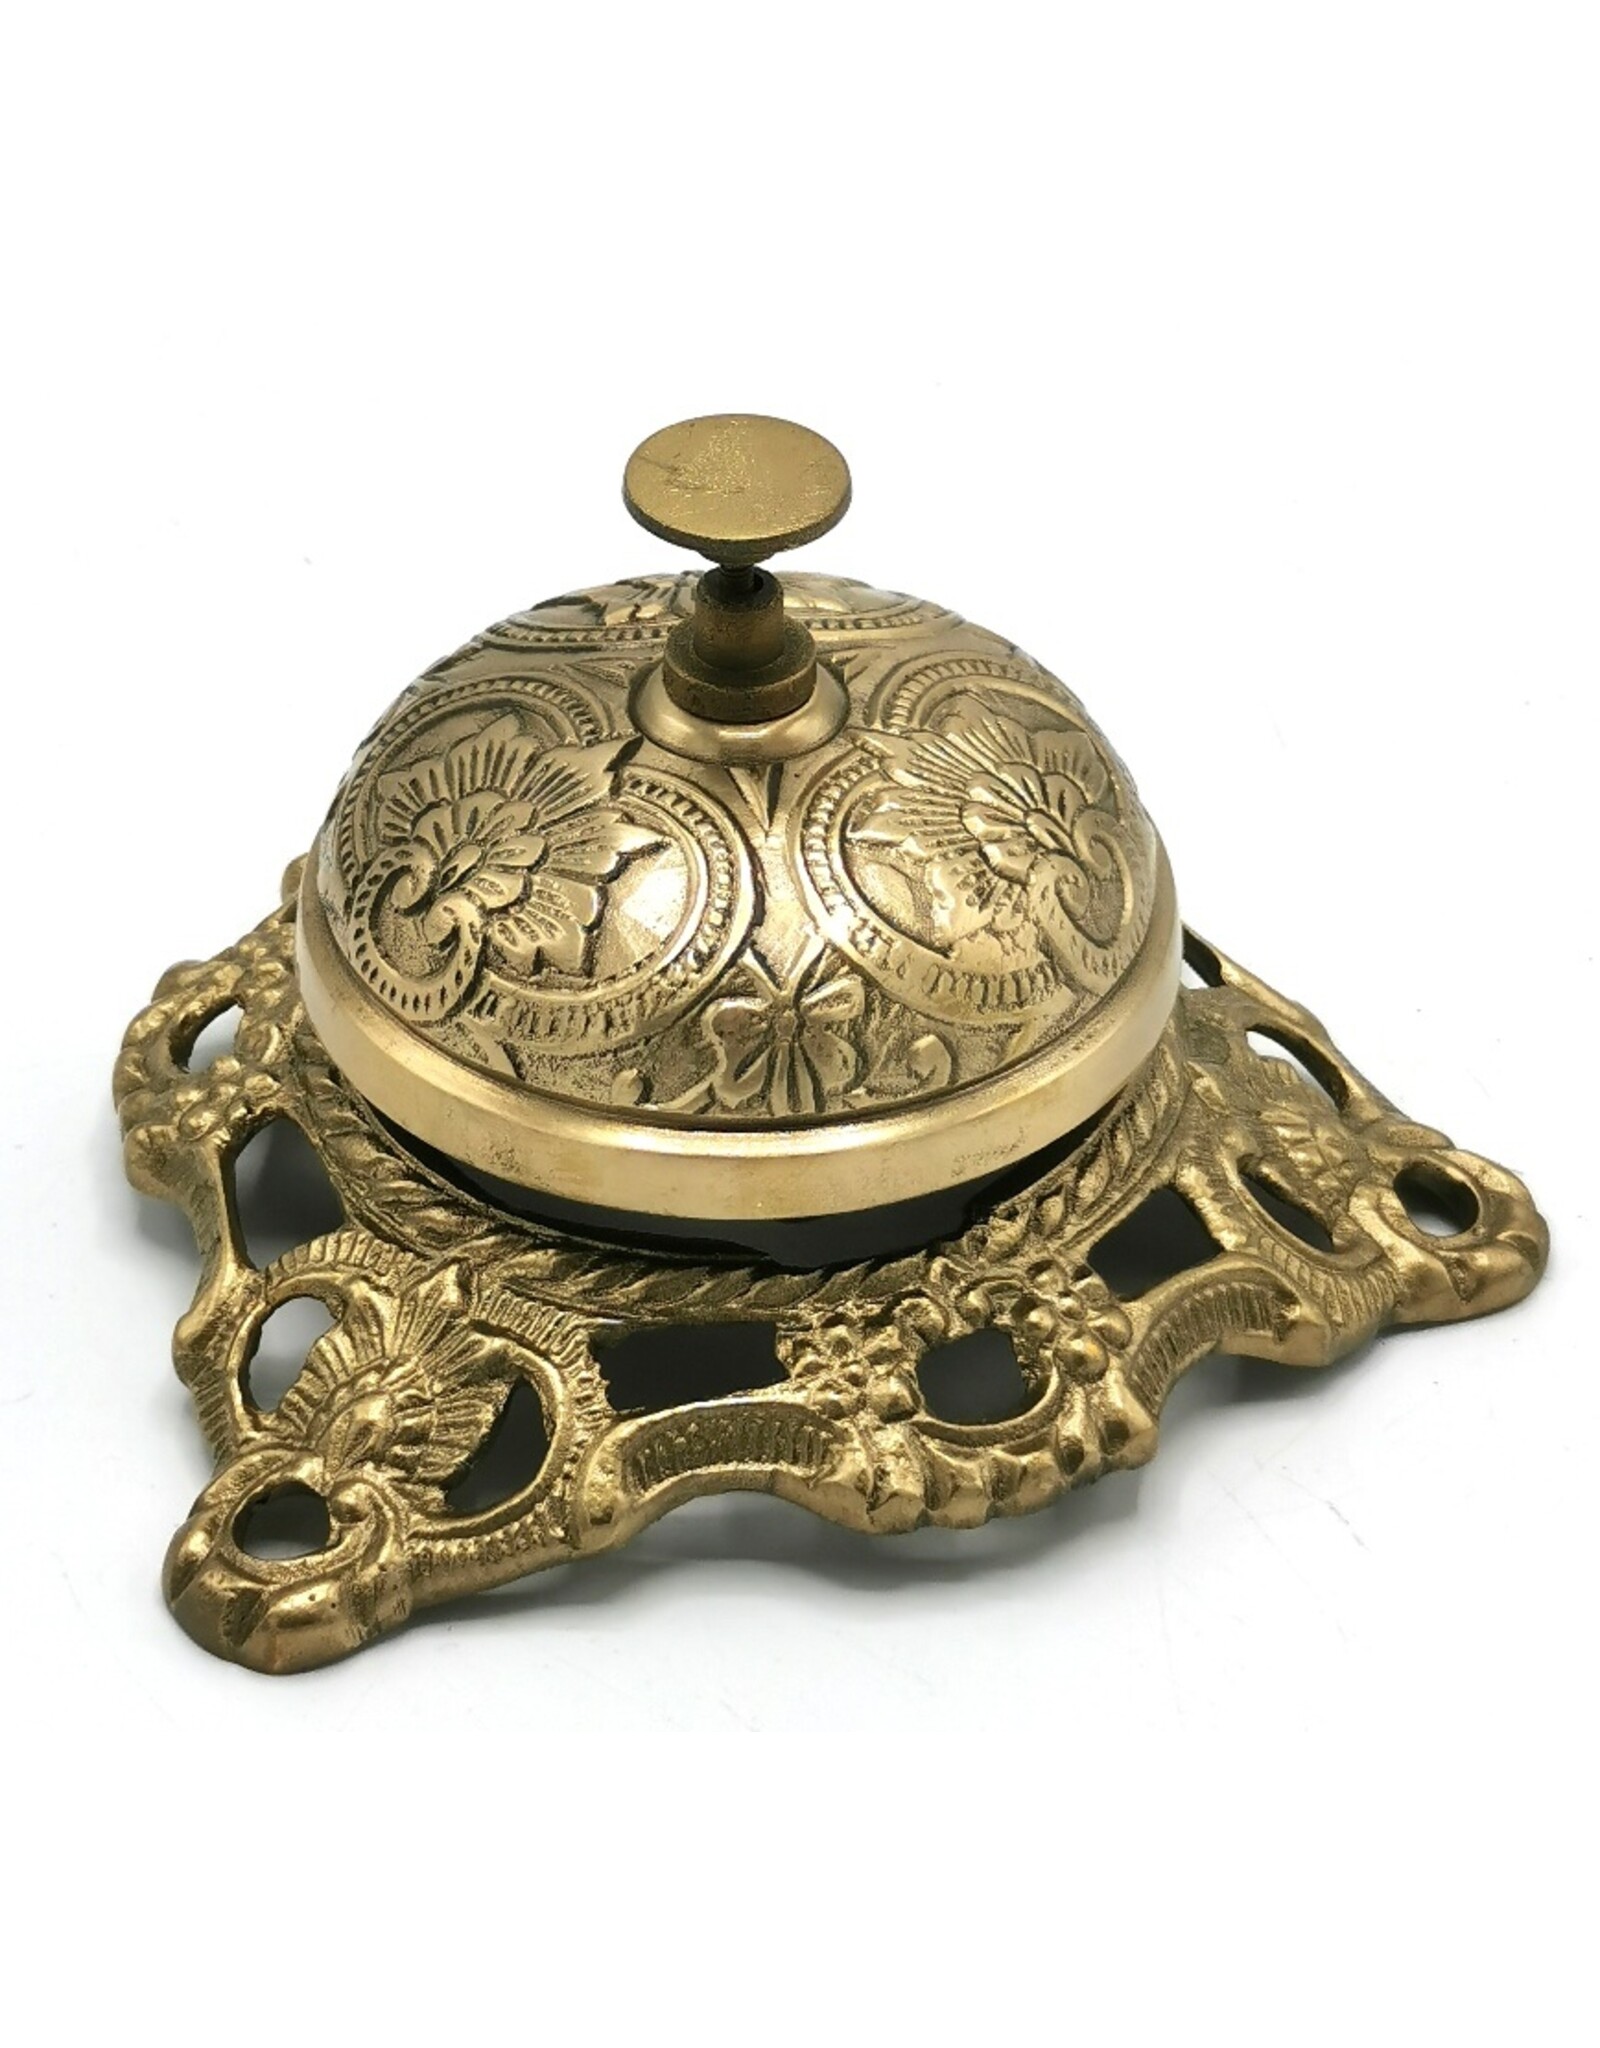 Dutch Style Miscellaneous - Baroque Hotel Bell / Table Bell with Engraved Ornament